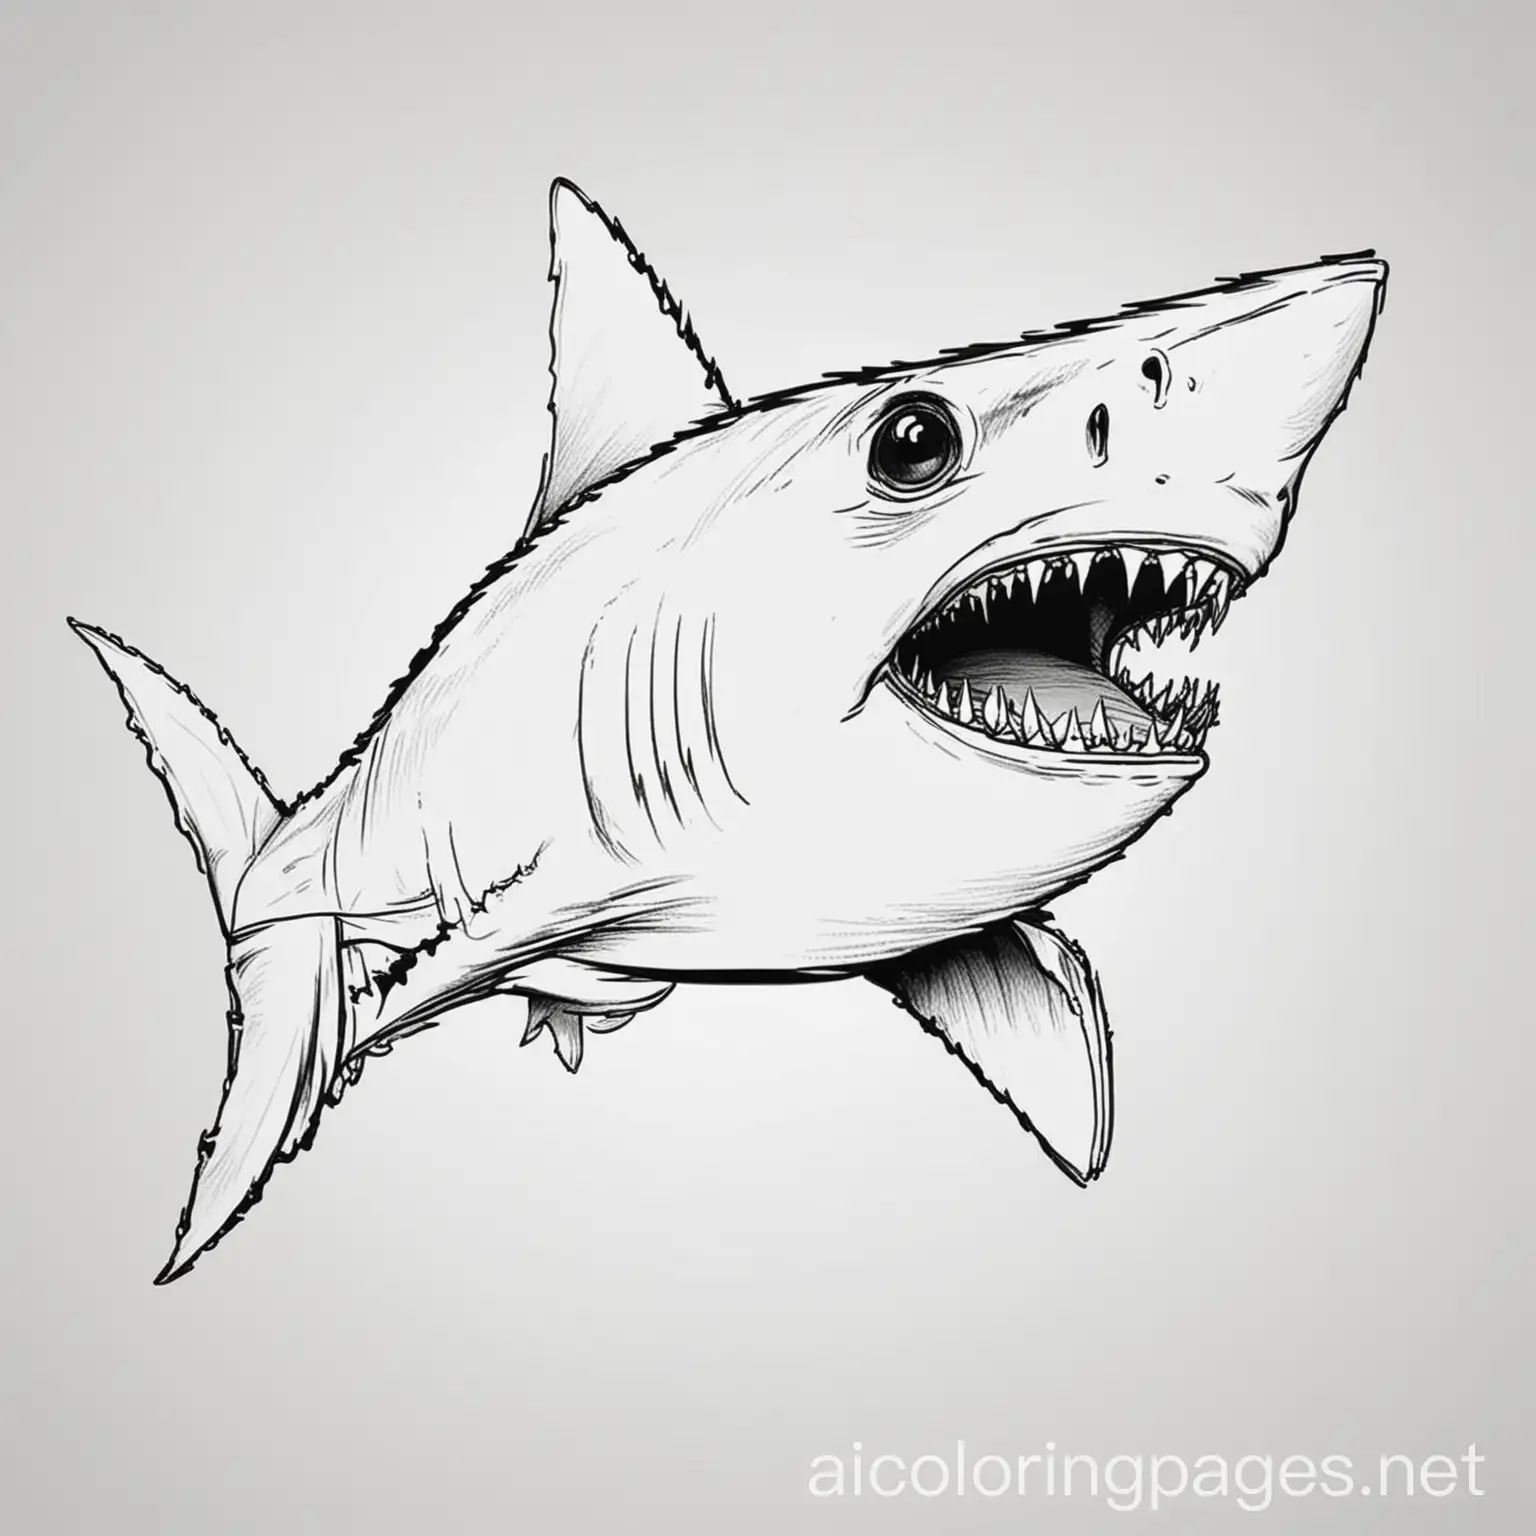 scary shark, Coloring Page, black and white, line art, white background, Simplicity, Ample White Space. The background of the coloring page is plain white to make it easy for young children to color within the lines. The outlines of all the subjects are easy to distinguish, making it simple for kids to color without too much difficulty